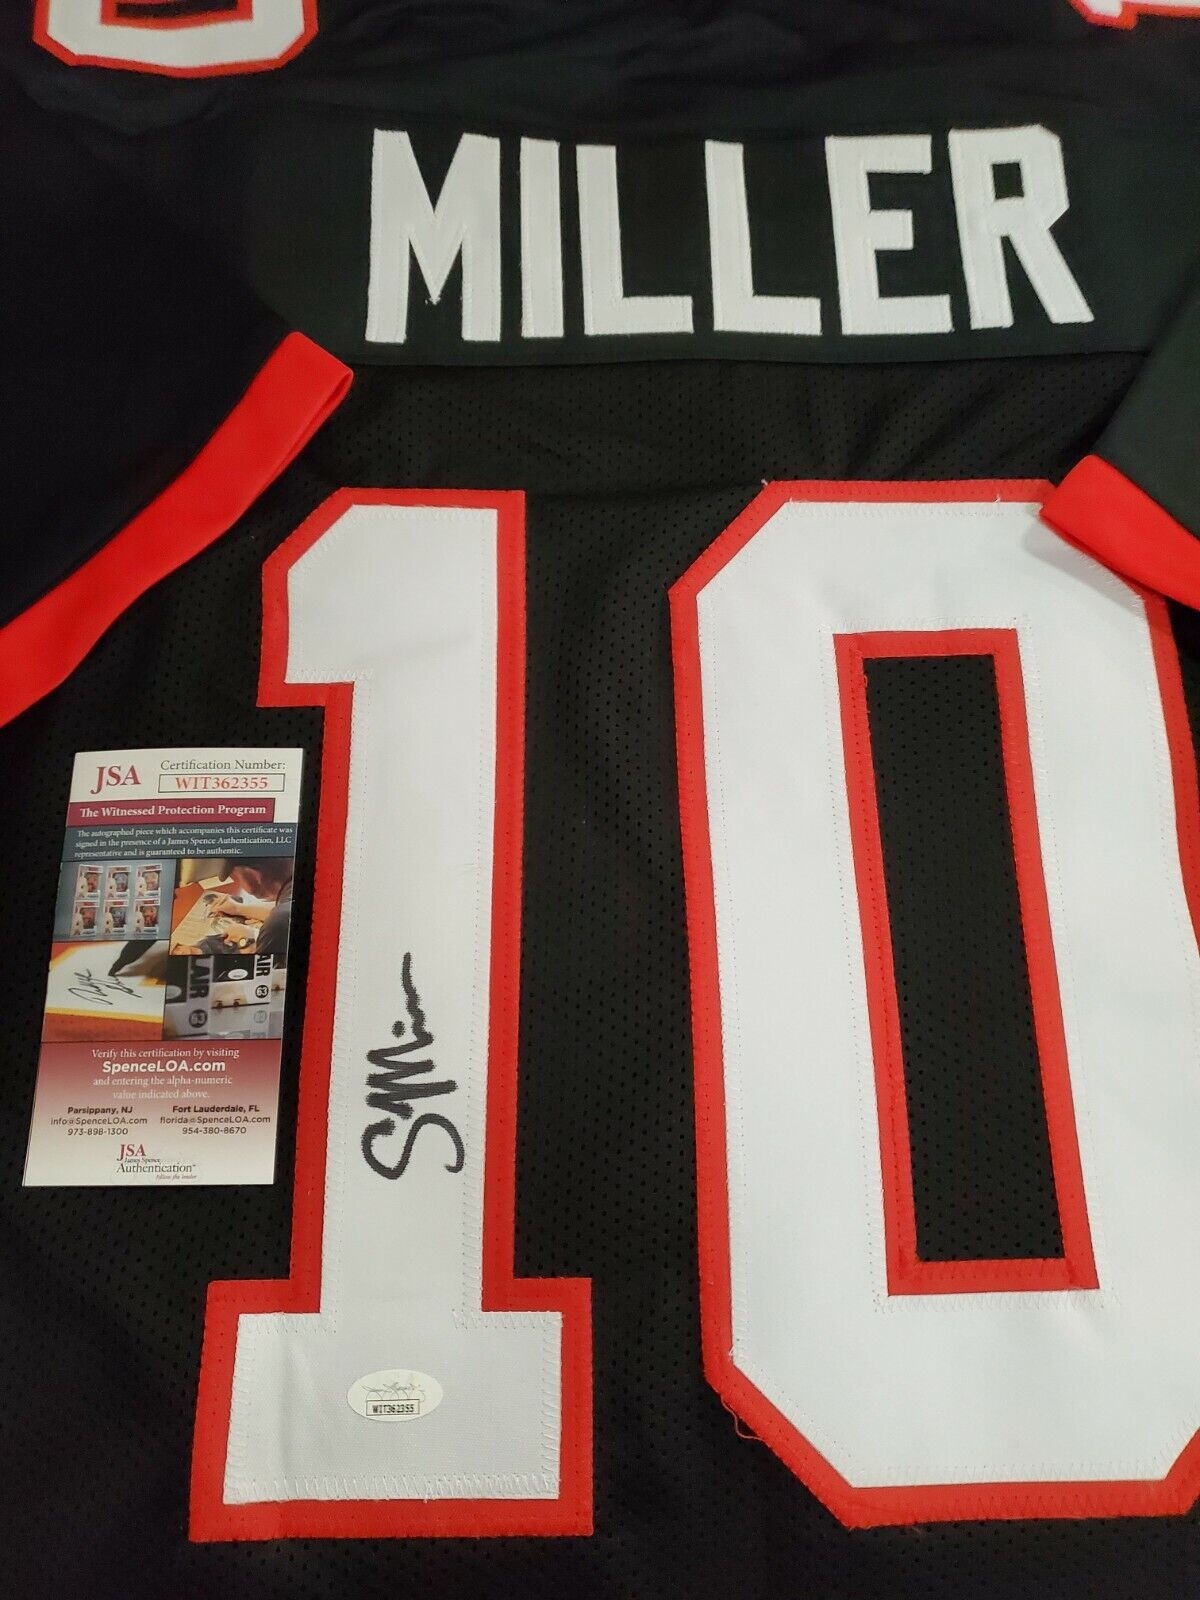 MVP Authentics Scotty Miller Autographed Signed Tampa Bay Buccaneers Jersey Jsa  Coa 112.50 sports jersey framing , jersey framing